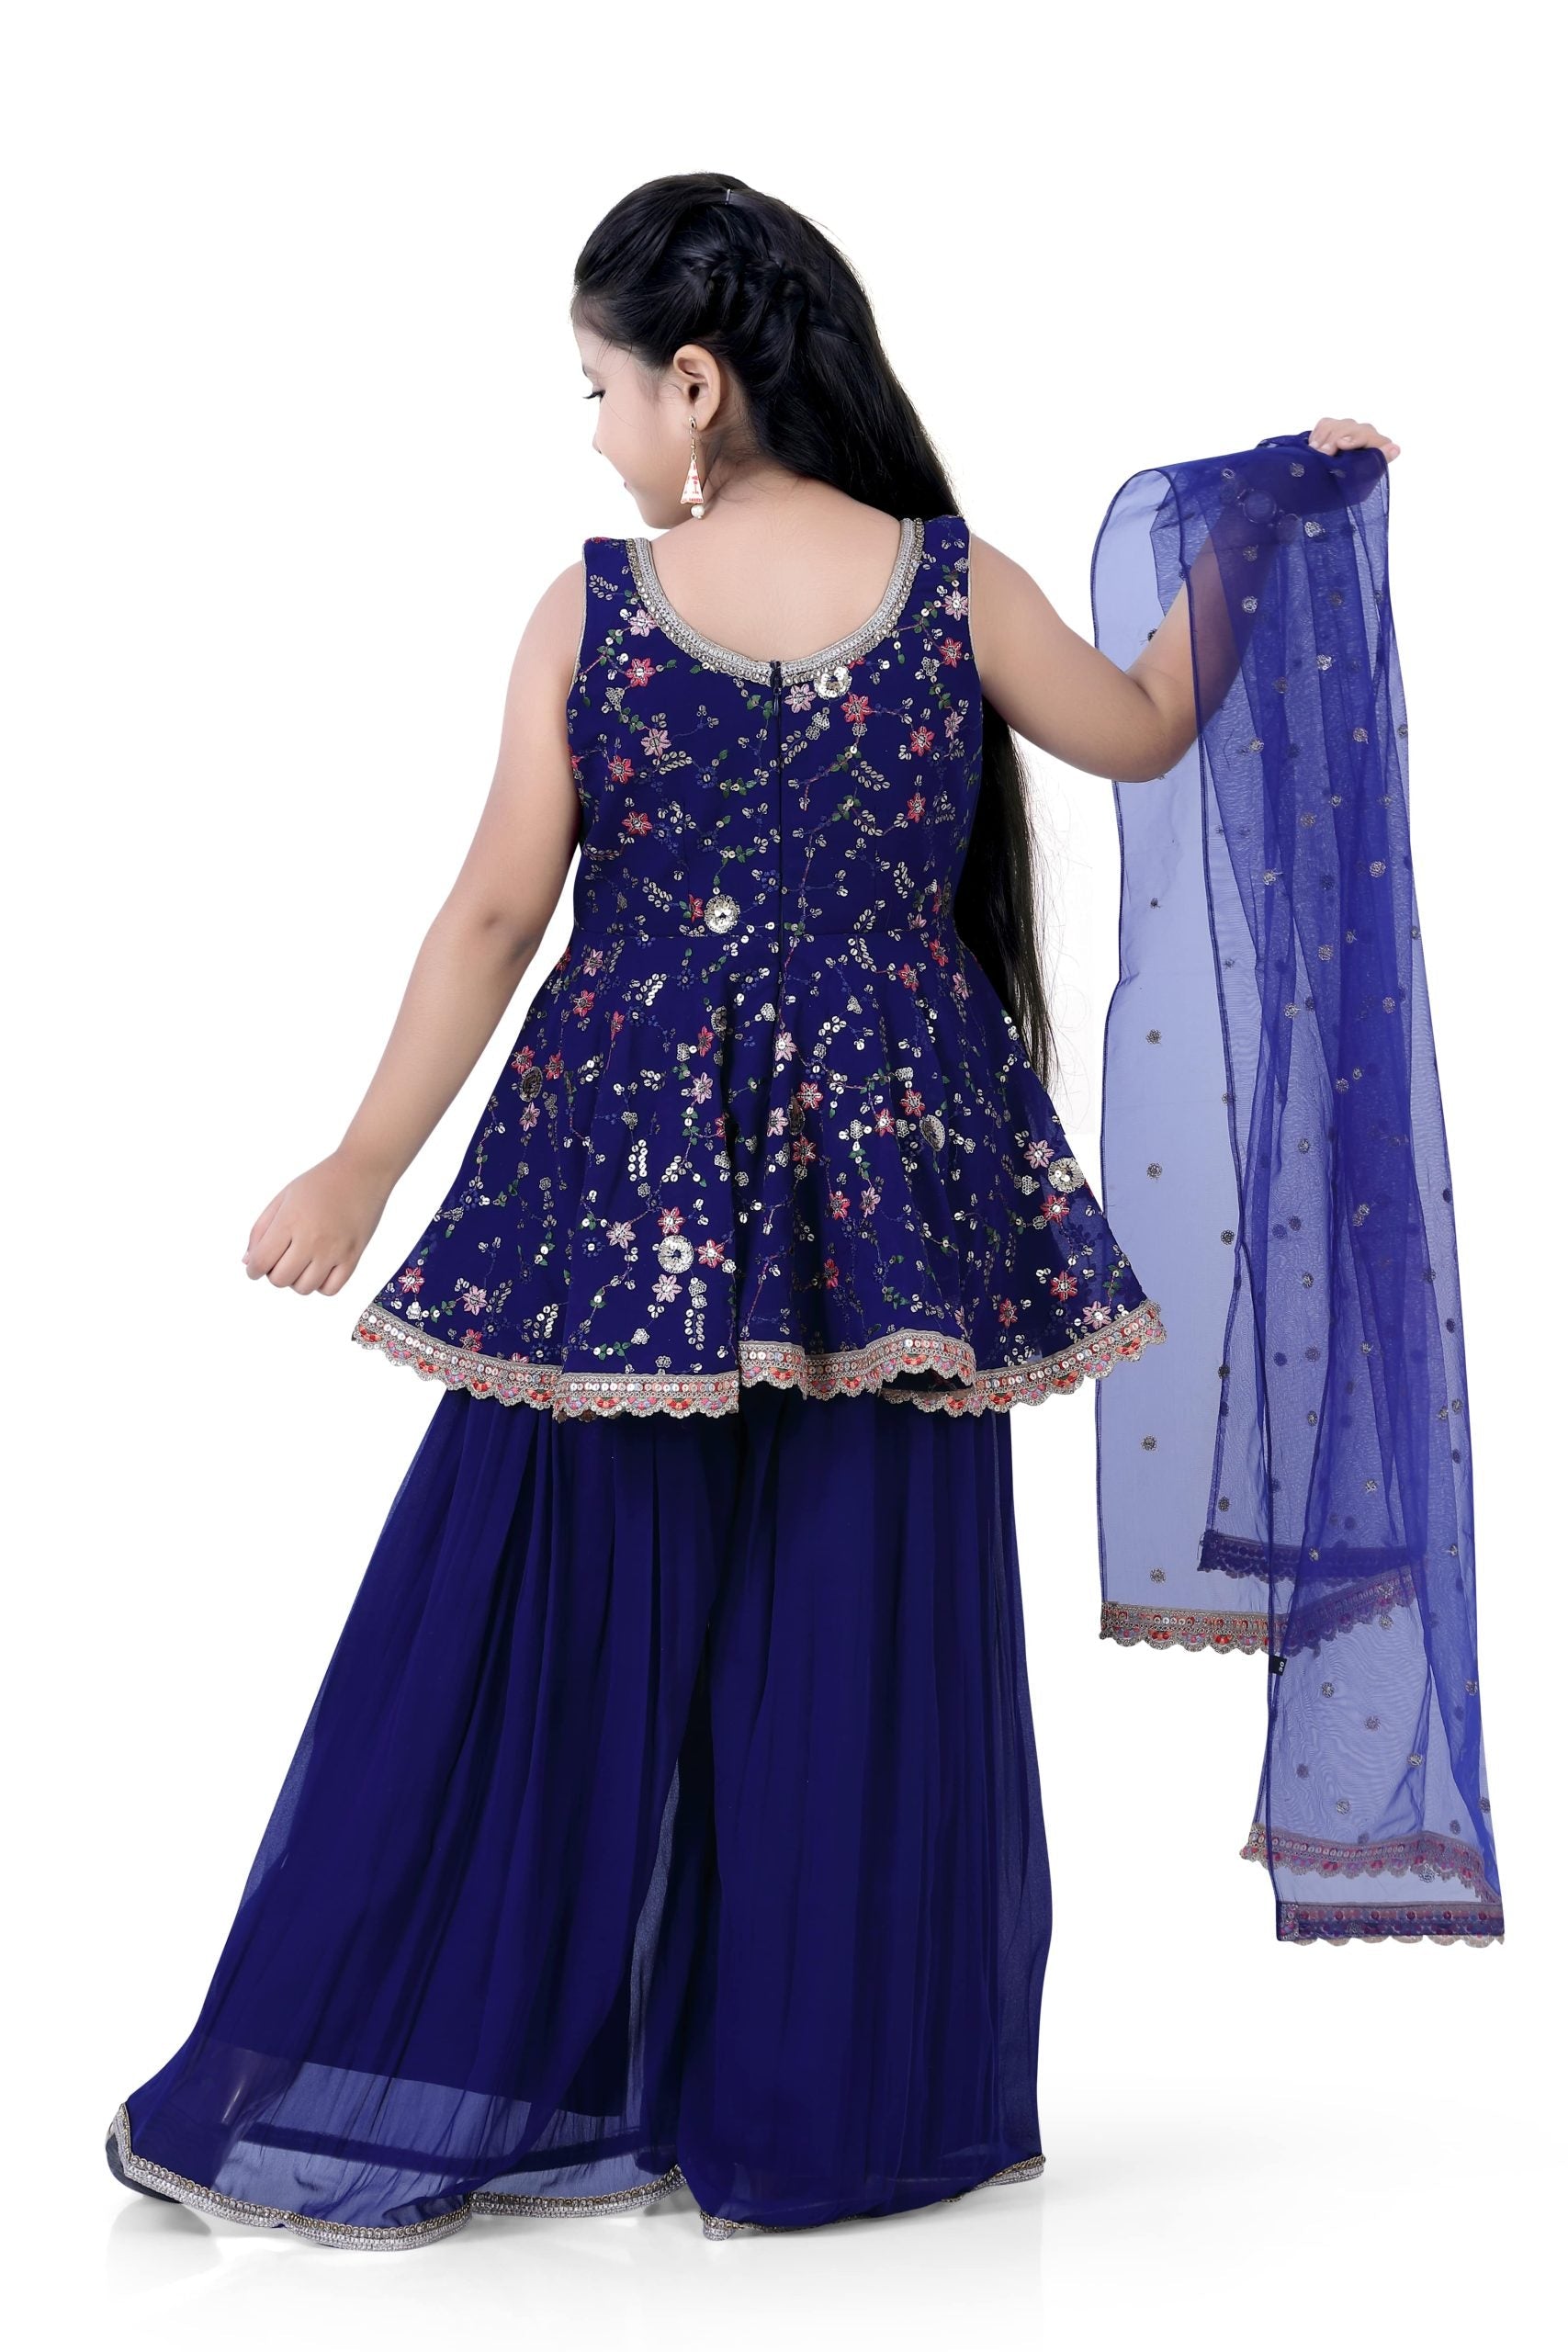 Girls Short Top & Palazzo With Dupatta in Navy Blue Color